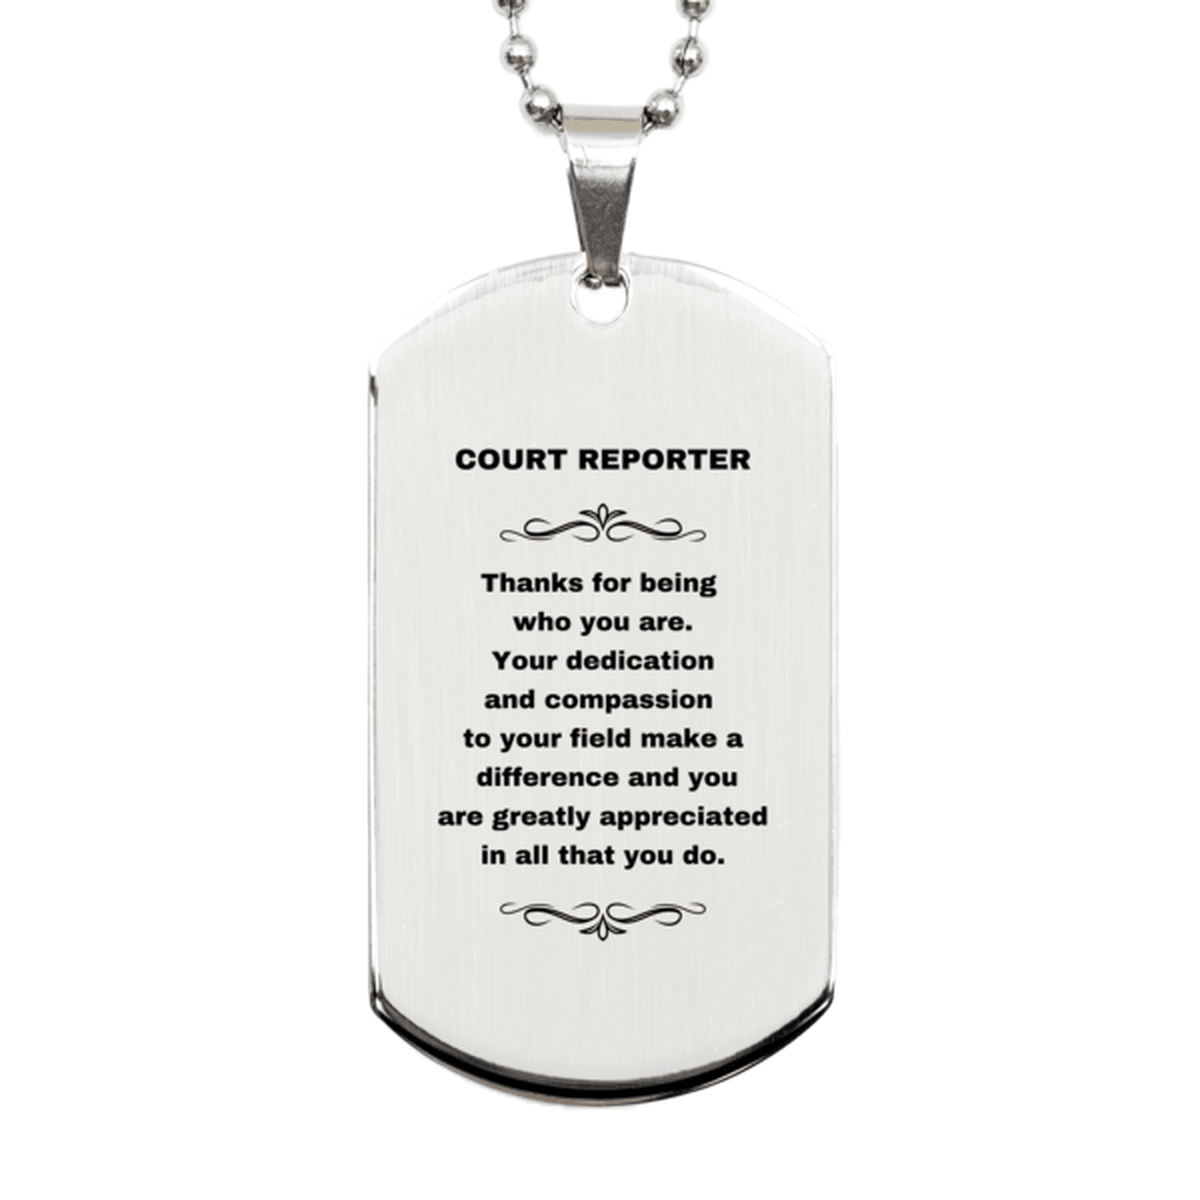 Court Reporter Silver Dog Tag Necklace Engraved Bracelet - Thanks for being who you are - Birthday Christmas Jewelry Gifts Coworkers Colleague Boss - Mallard Moon Gift Shop